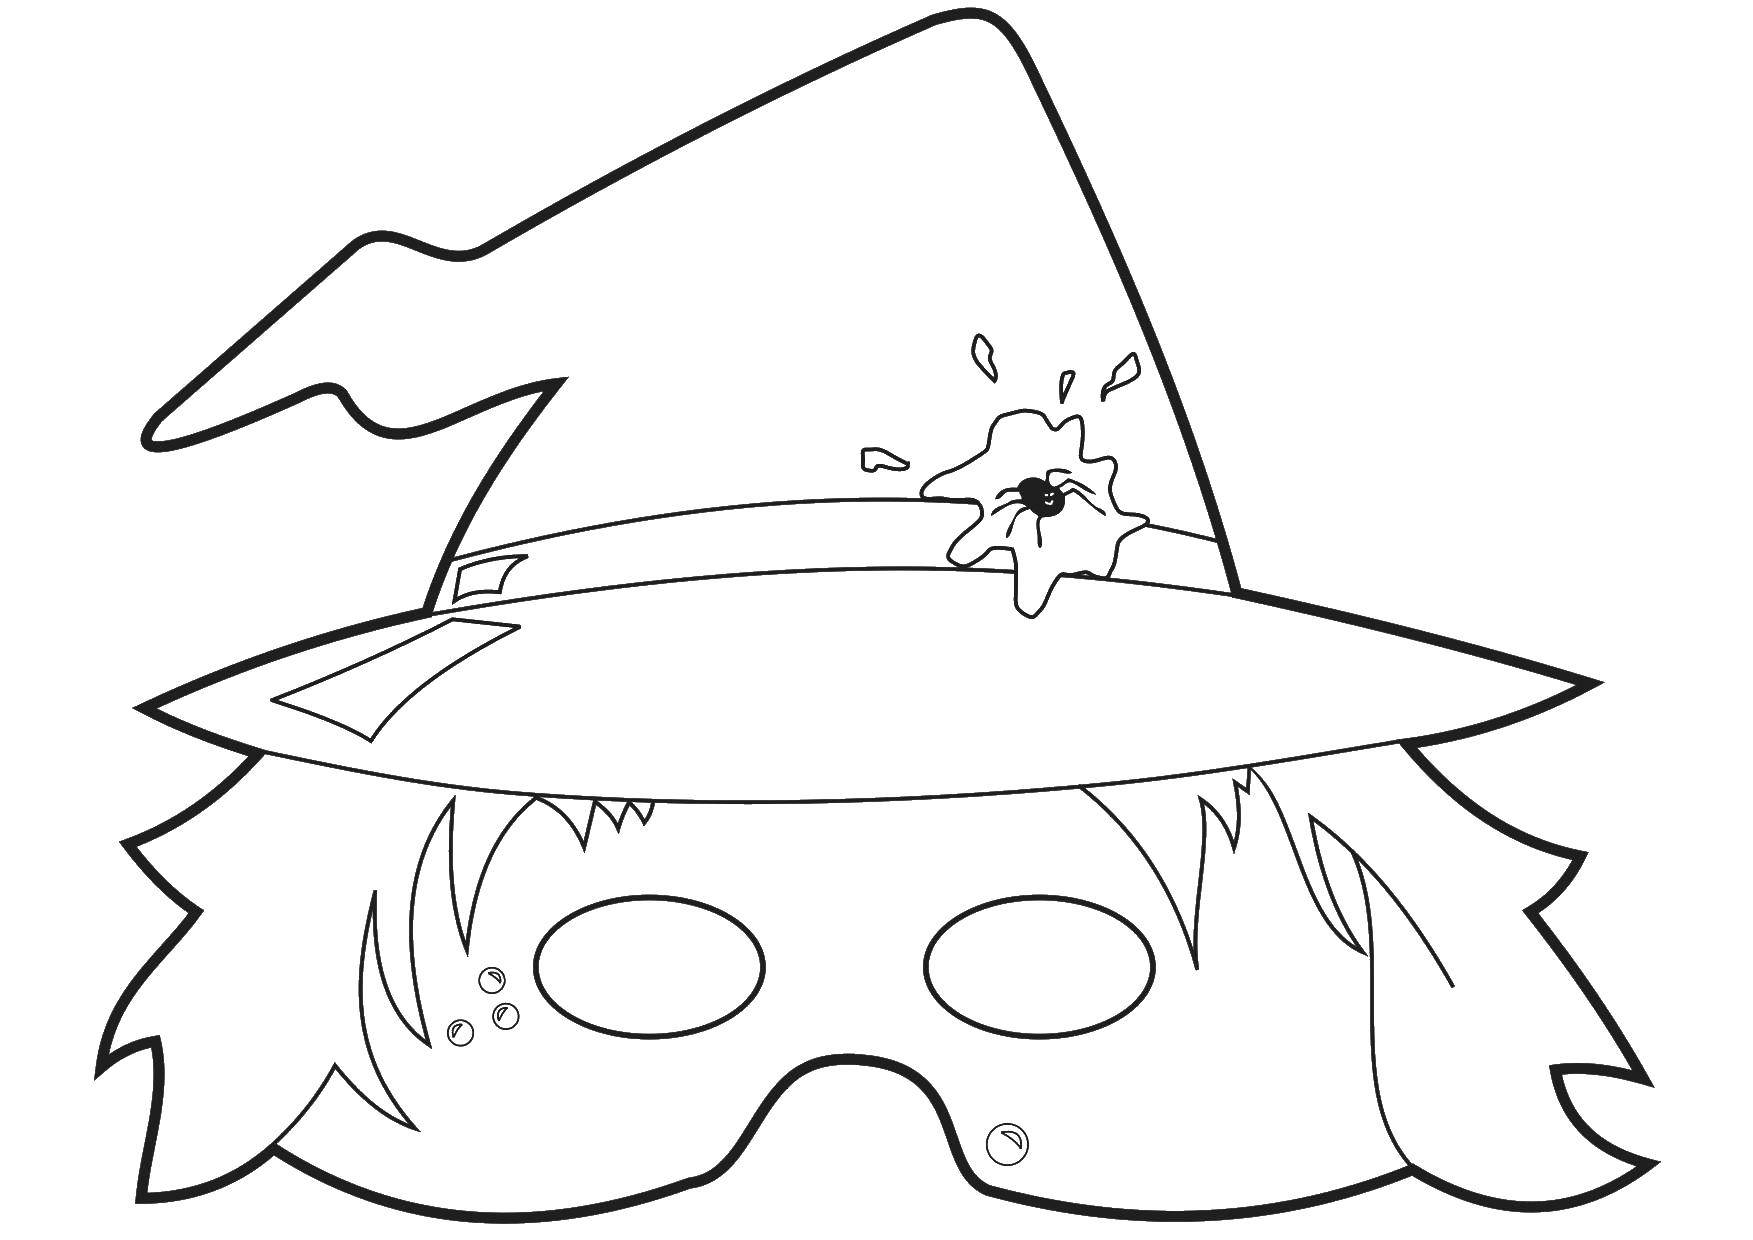 Coloring Mask witch. Category mask. Tags:  mask, witch.